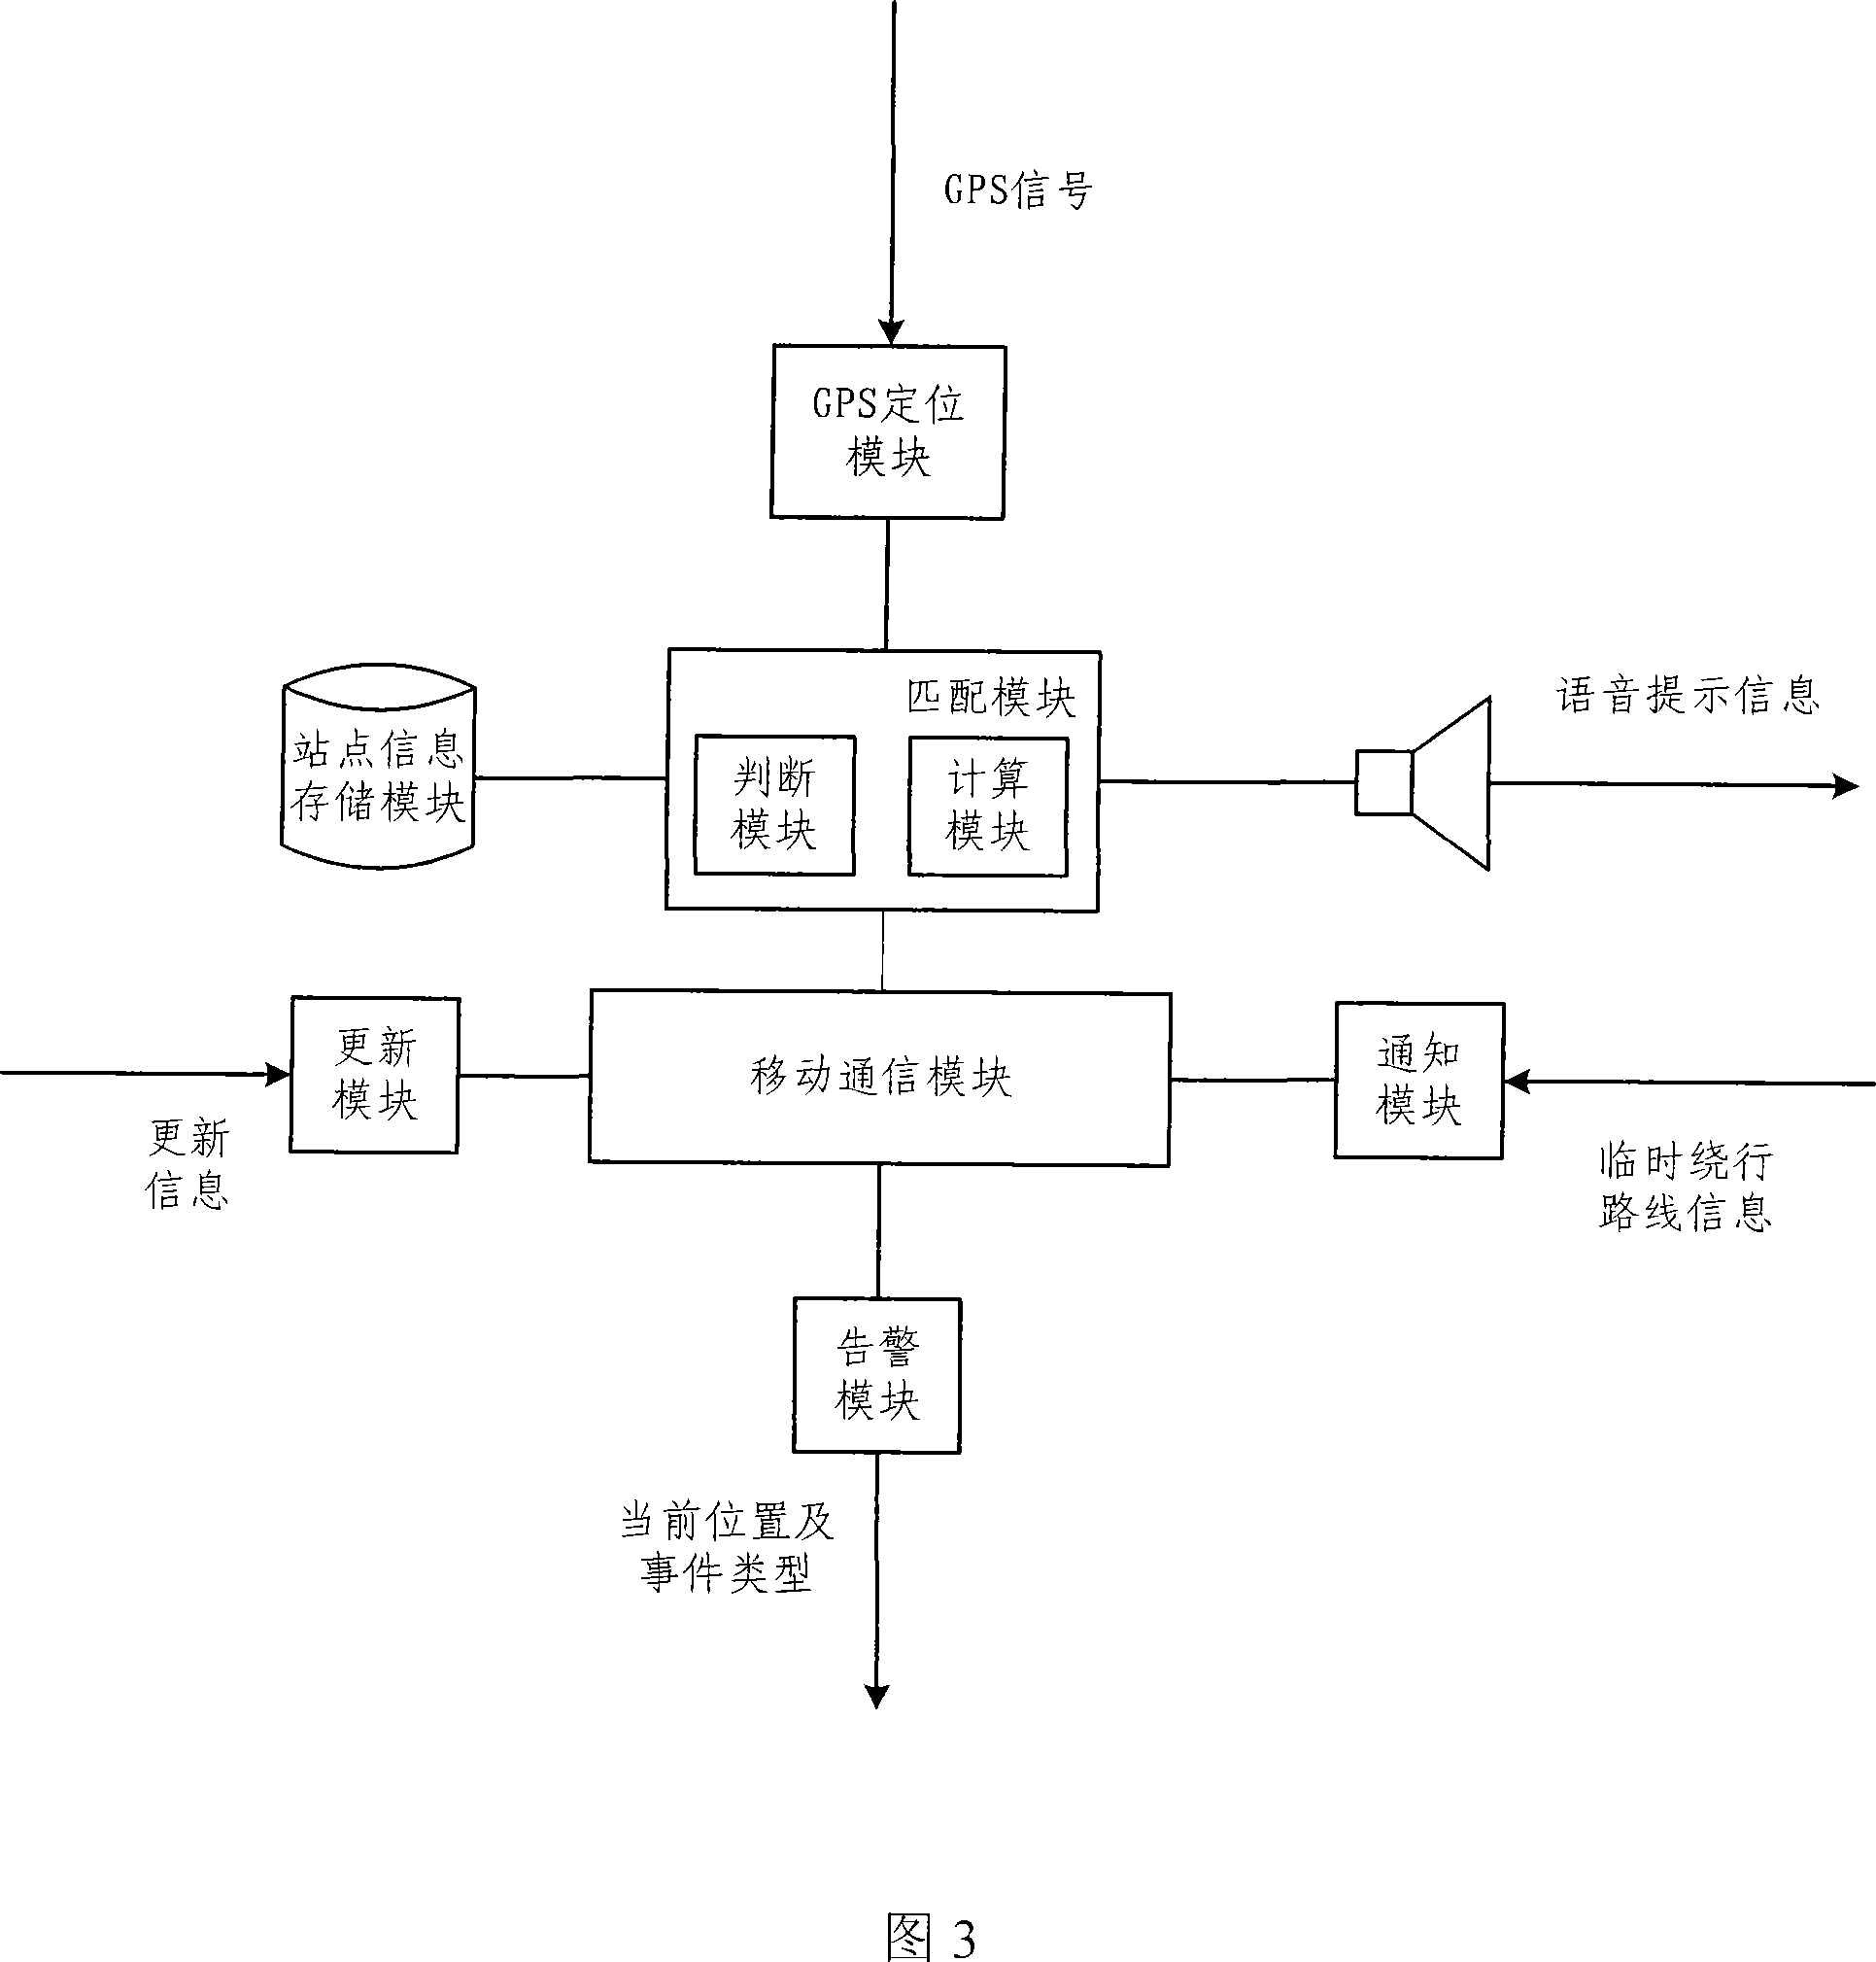 Device and method for reporting station of public transport